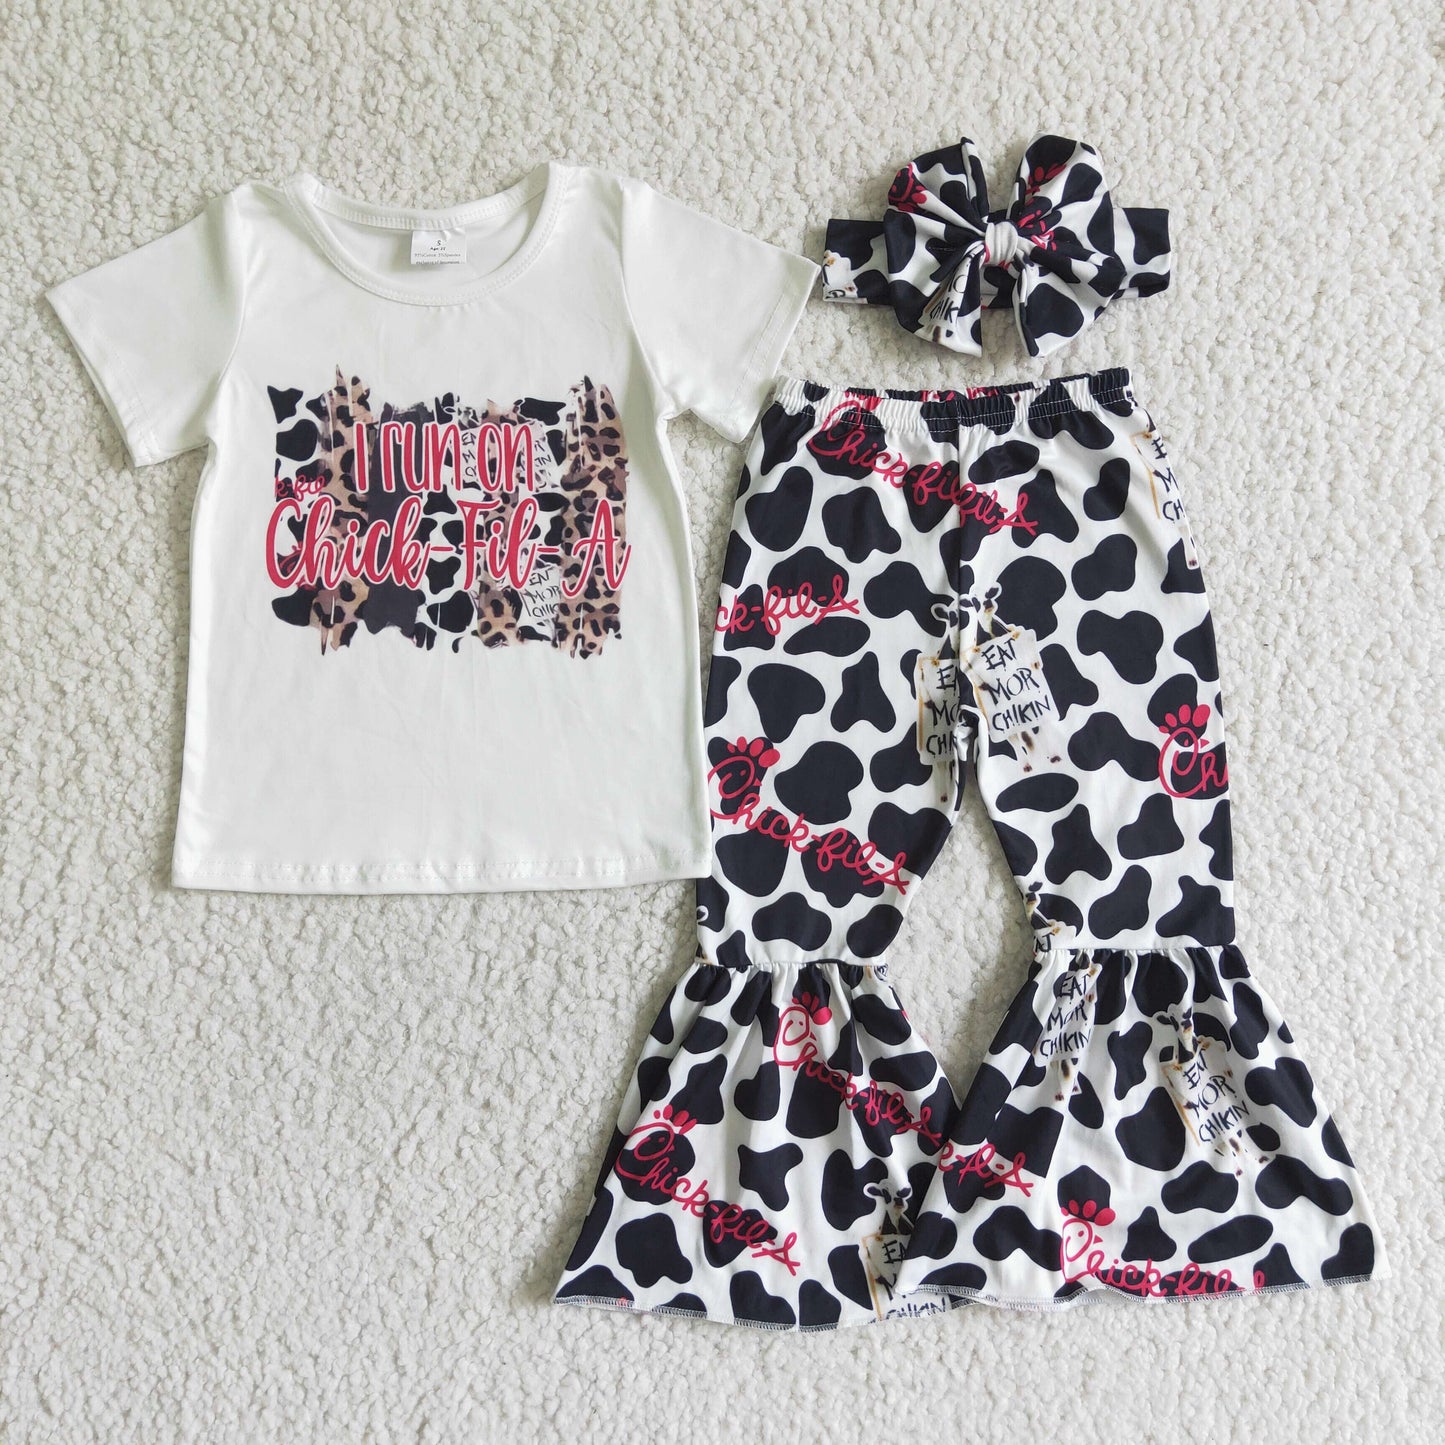 chick-fil-a outfit milk cow bells set(headband order extra)